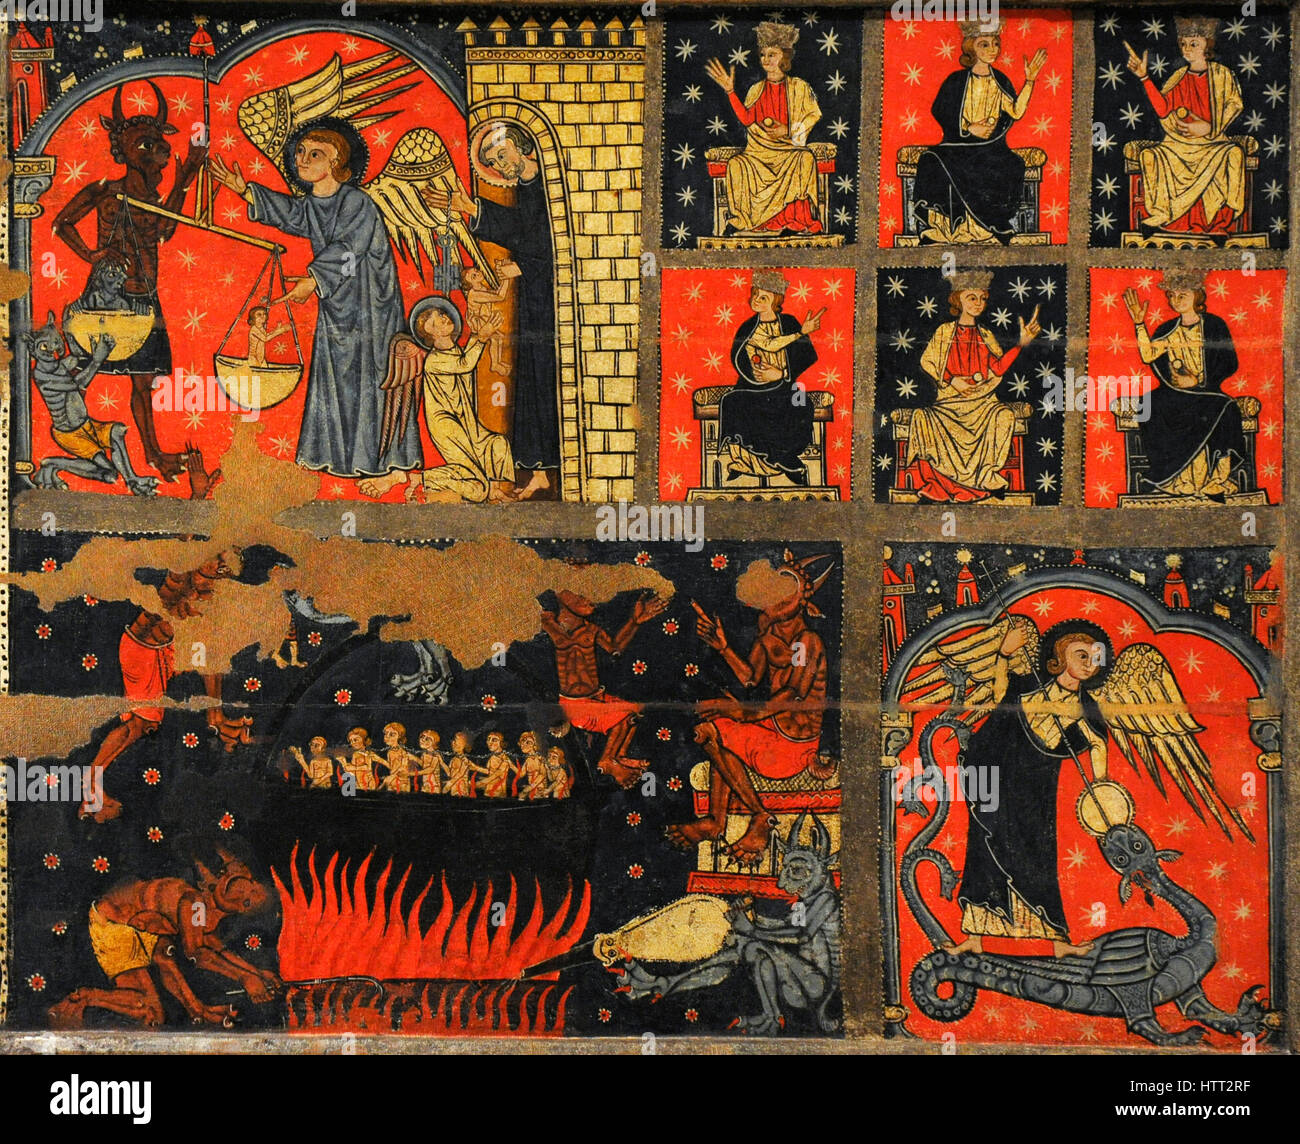 Master of Soriguerola (active late 13th century-early 14th century). Panel of Saint Michael. Detail depicting left to right and top to bottom: Saint Michael with the devil weighing souls; an angel delivering the soul of a chosen one to Saint Peter; the blessed; the damned souls in hell and Saint Michael struggling with the dragon. End of 13th century. From the Parish Church of Sant Miquel de Soriguerola (Fontanals de Cerdanya, Catalonia). National Art Museum of Catalonia. Barcelona. Catalonia. Spain. Stock Photo